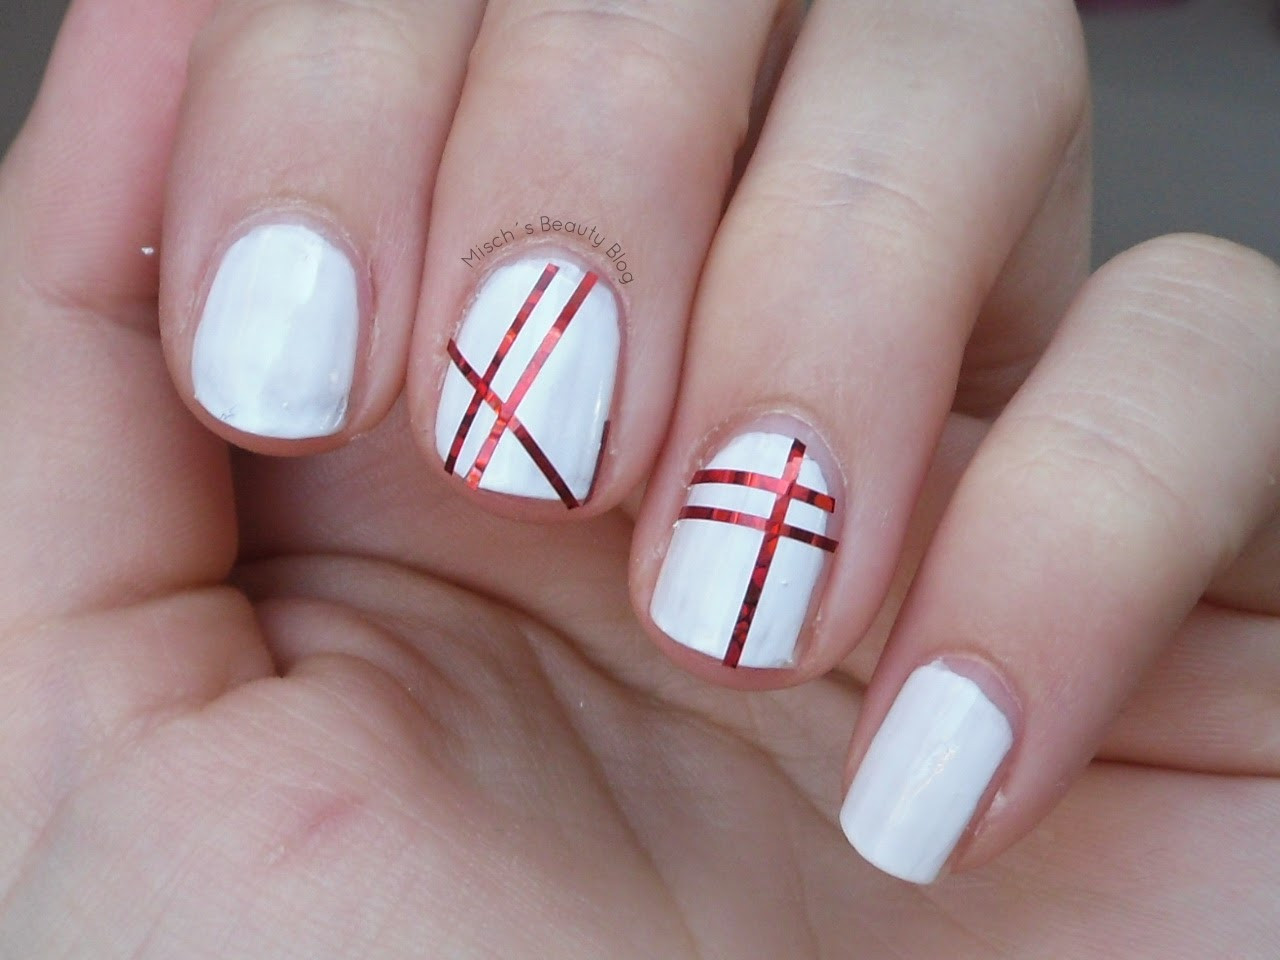 Nail Designs With Striping Tape
 55 Best Striping Tape Nail Art Design Ideas